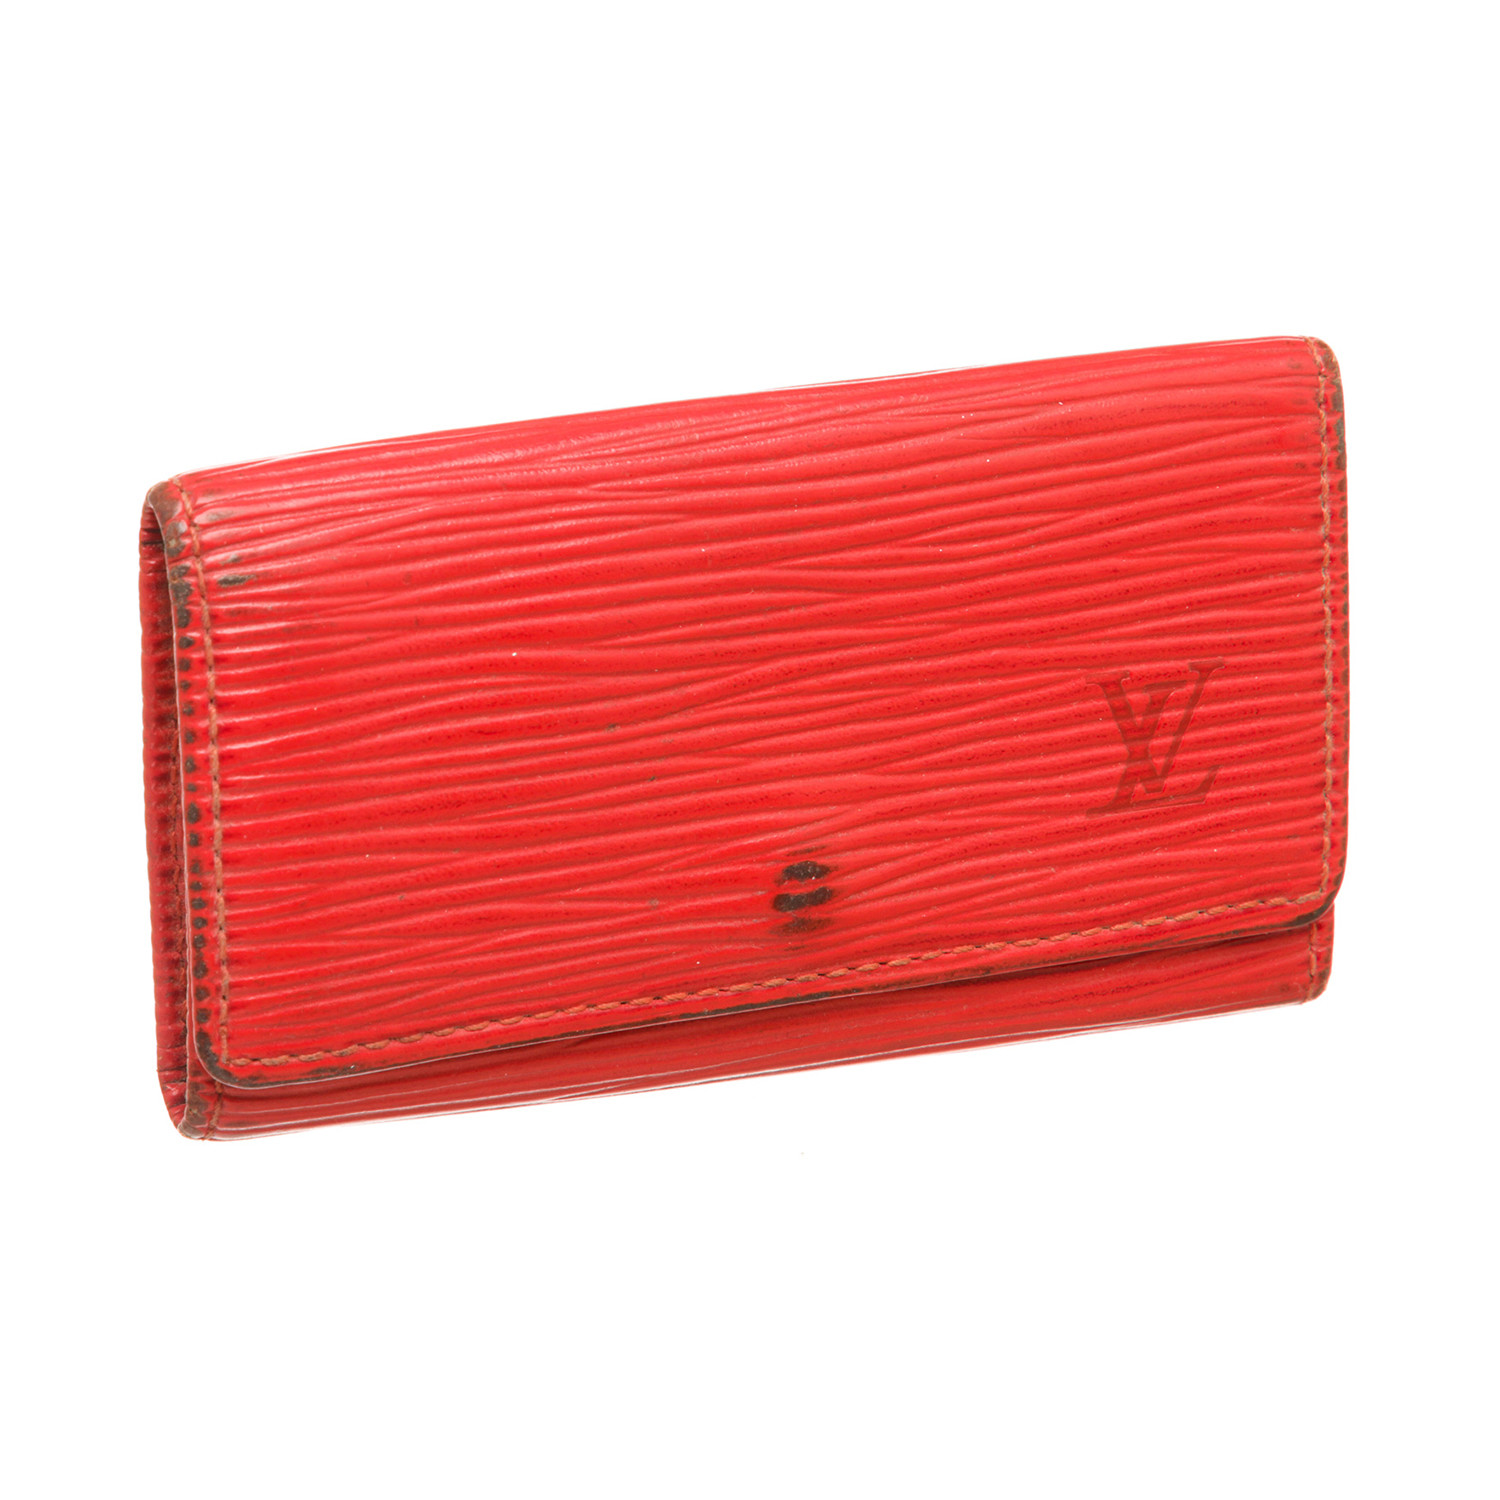 Louis Vuitton // Epi Leather 4 Key Holder // Red V2 // Pre-Owned - Pre-Owned Designer Bags ...